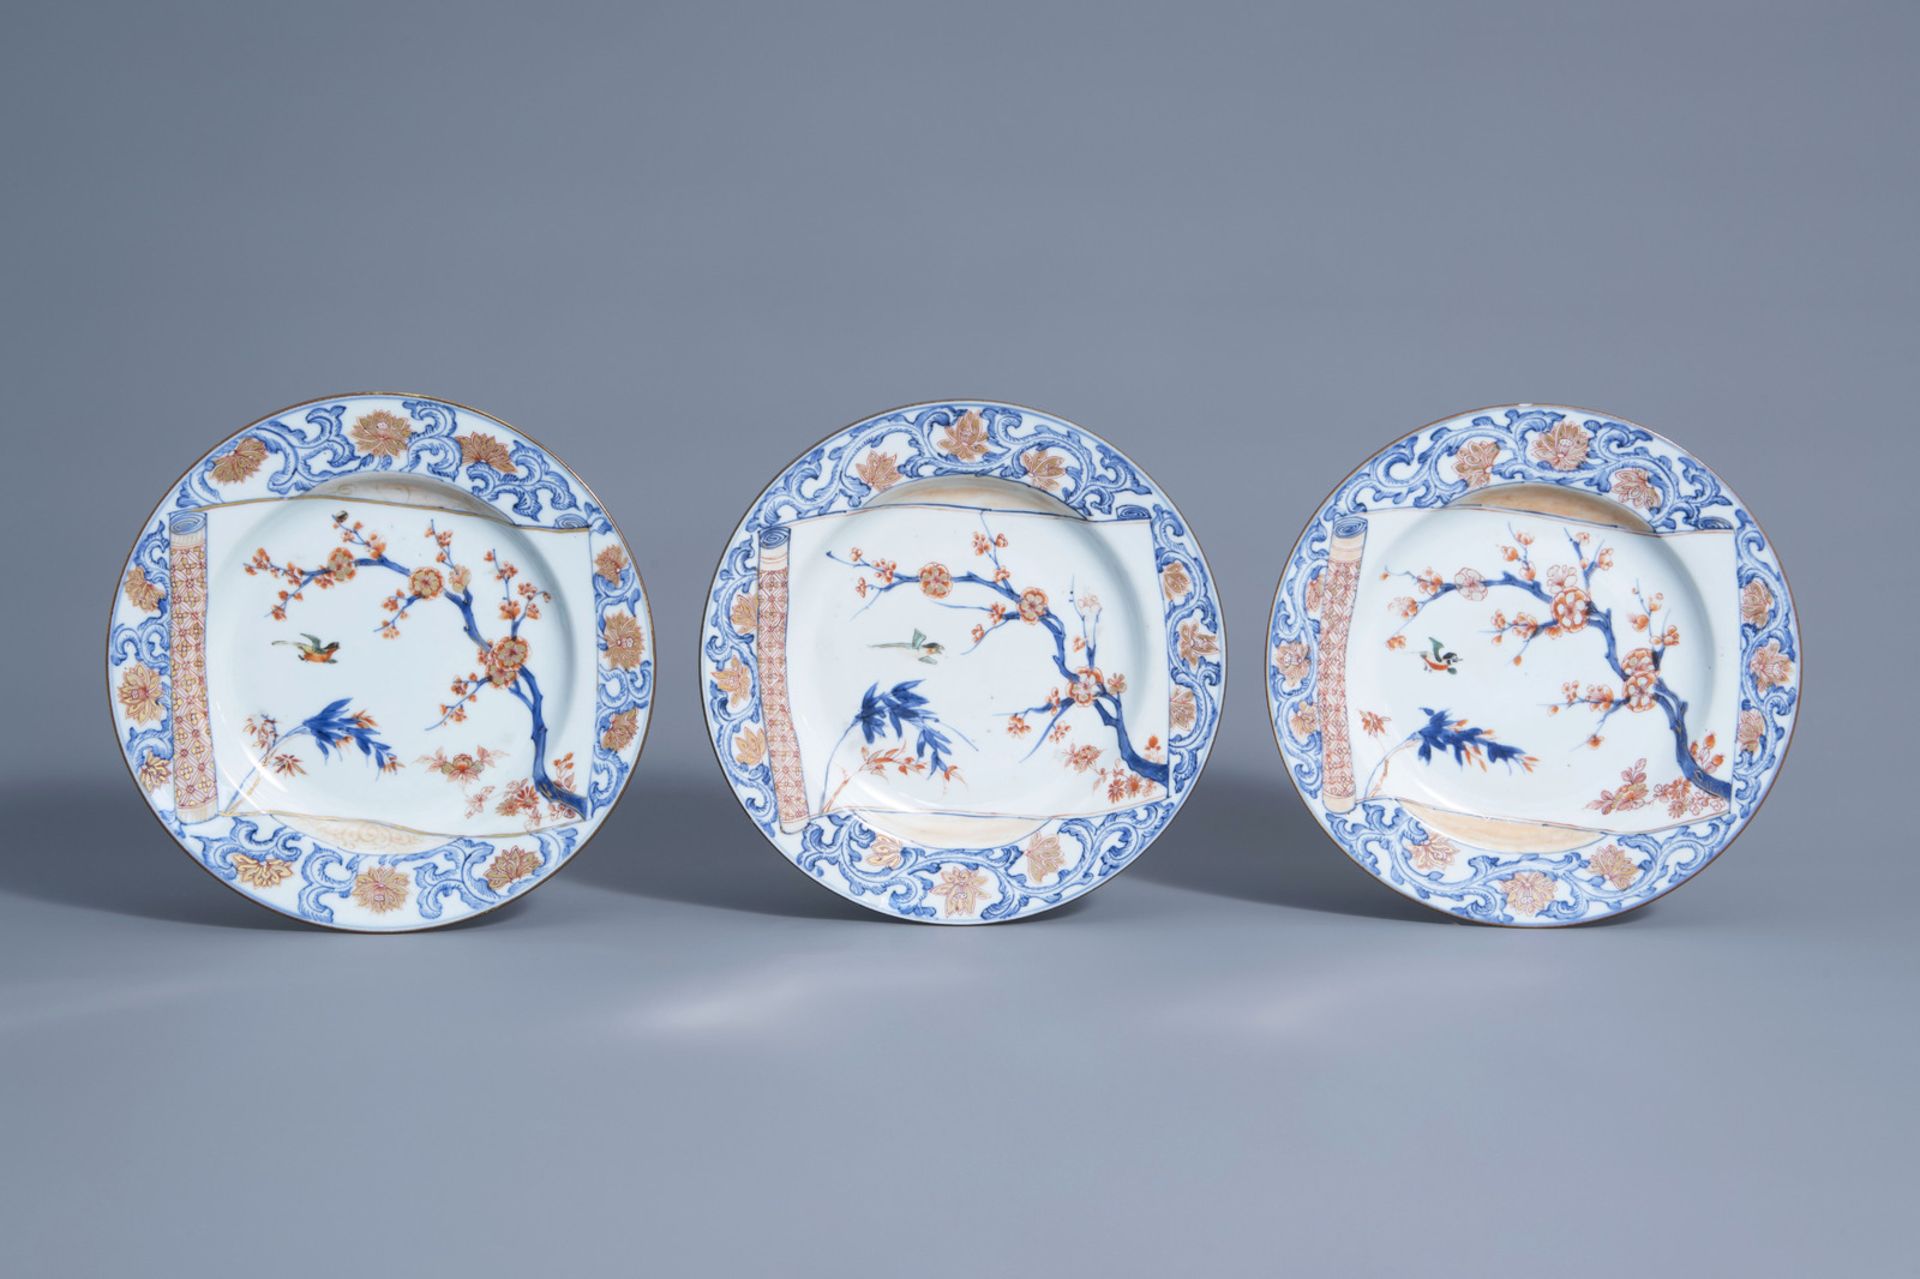 Three Chinese Imari style plates with a scroll with a bird among blossoming branches, Yongzheng